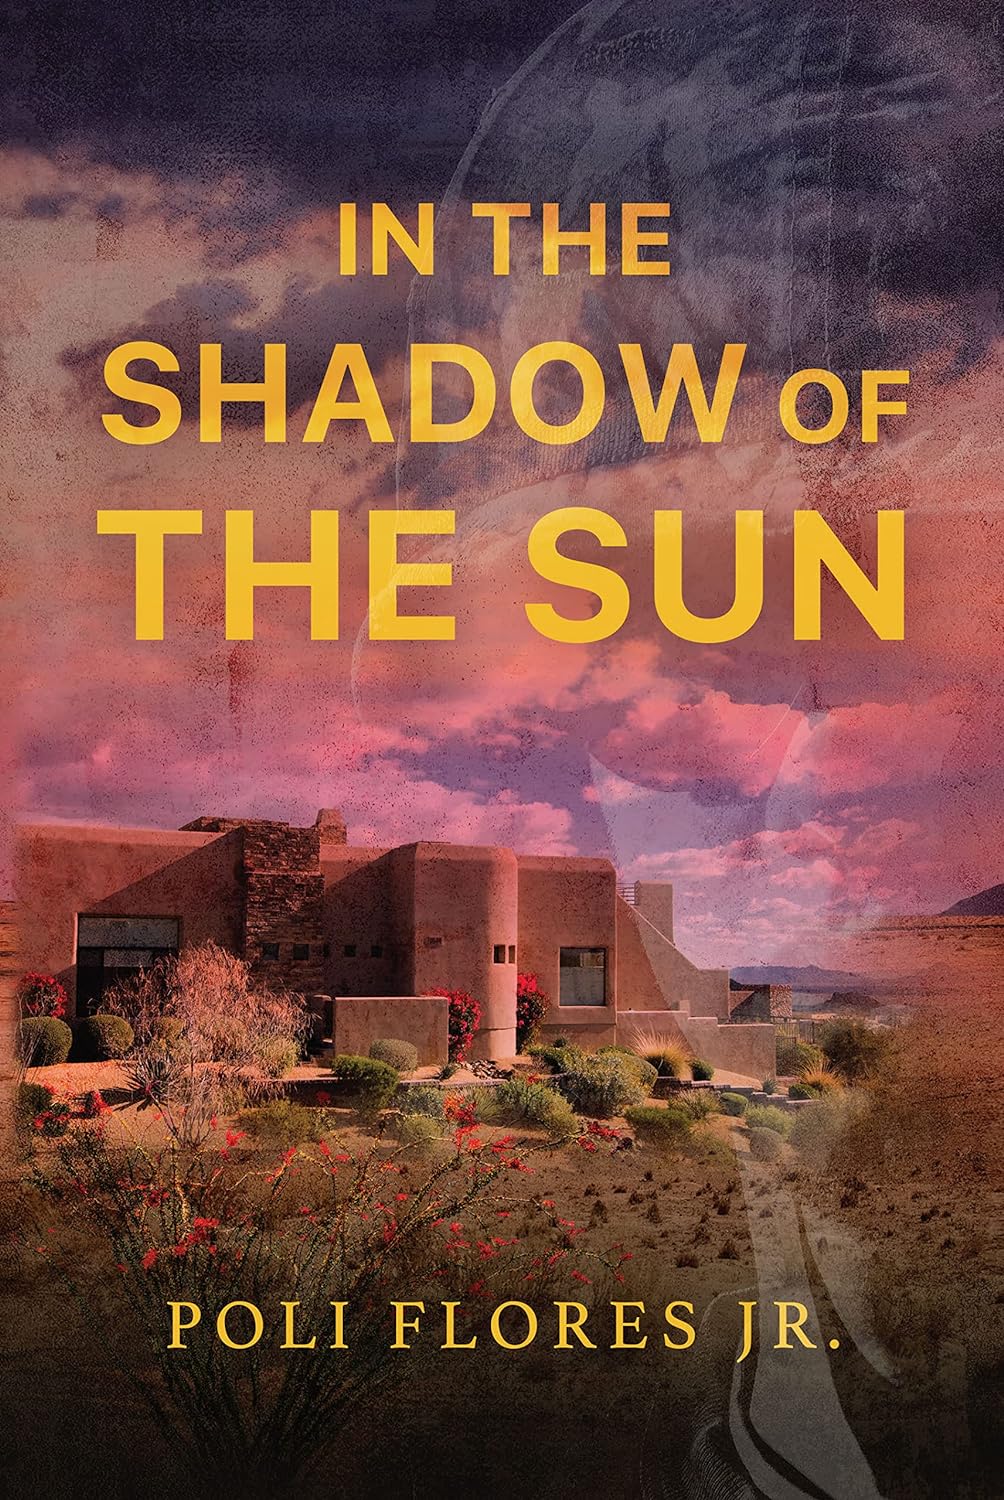 In the Shadow of the Sun by Poli Flores Jr.